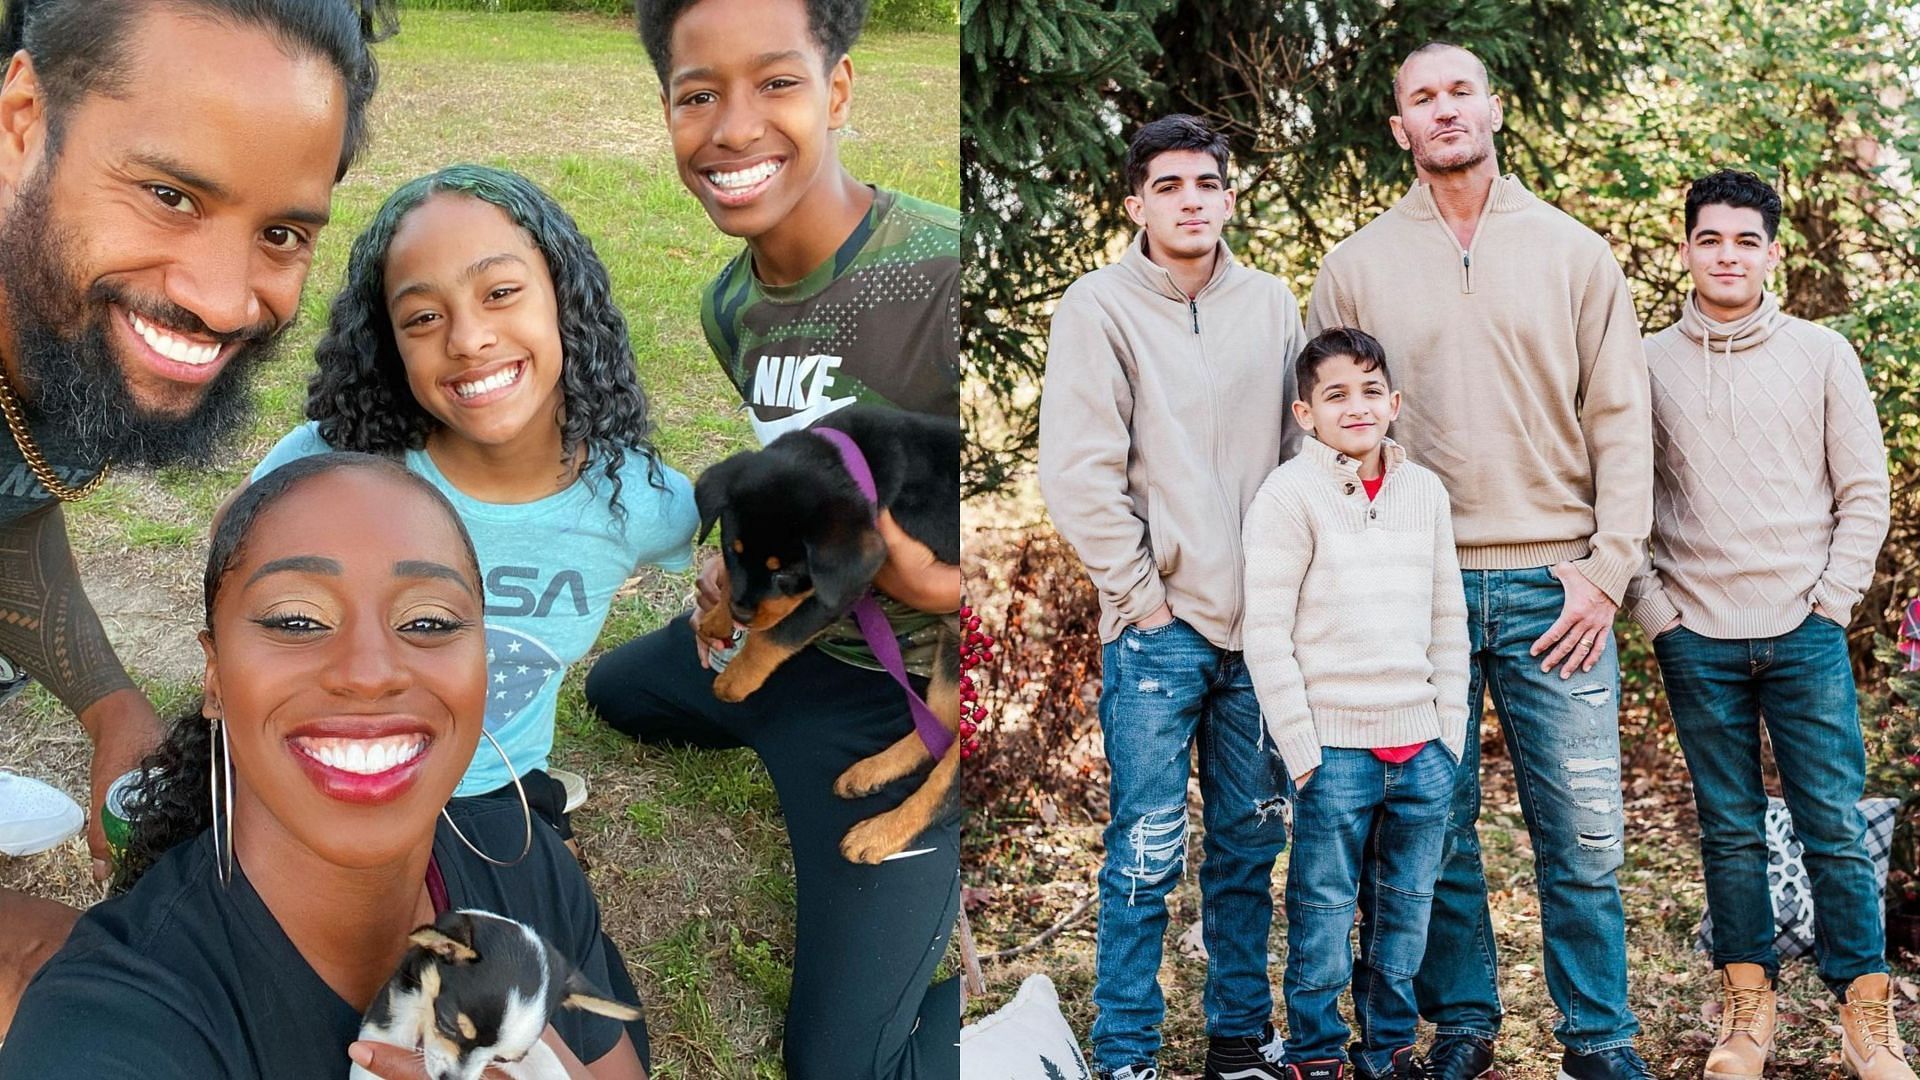 Naomi with her family (left) and Randy Orton with his stepsons (right)